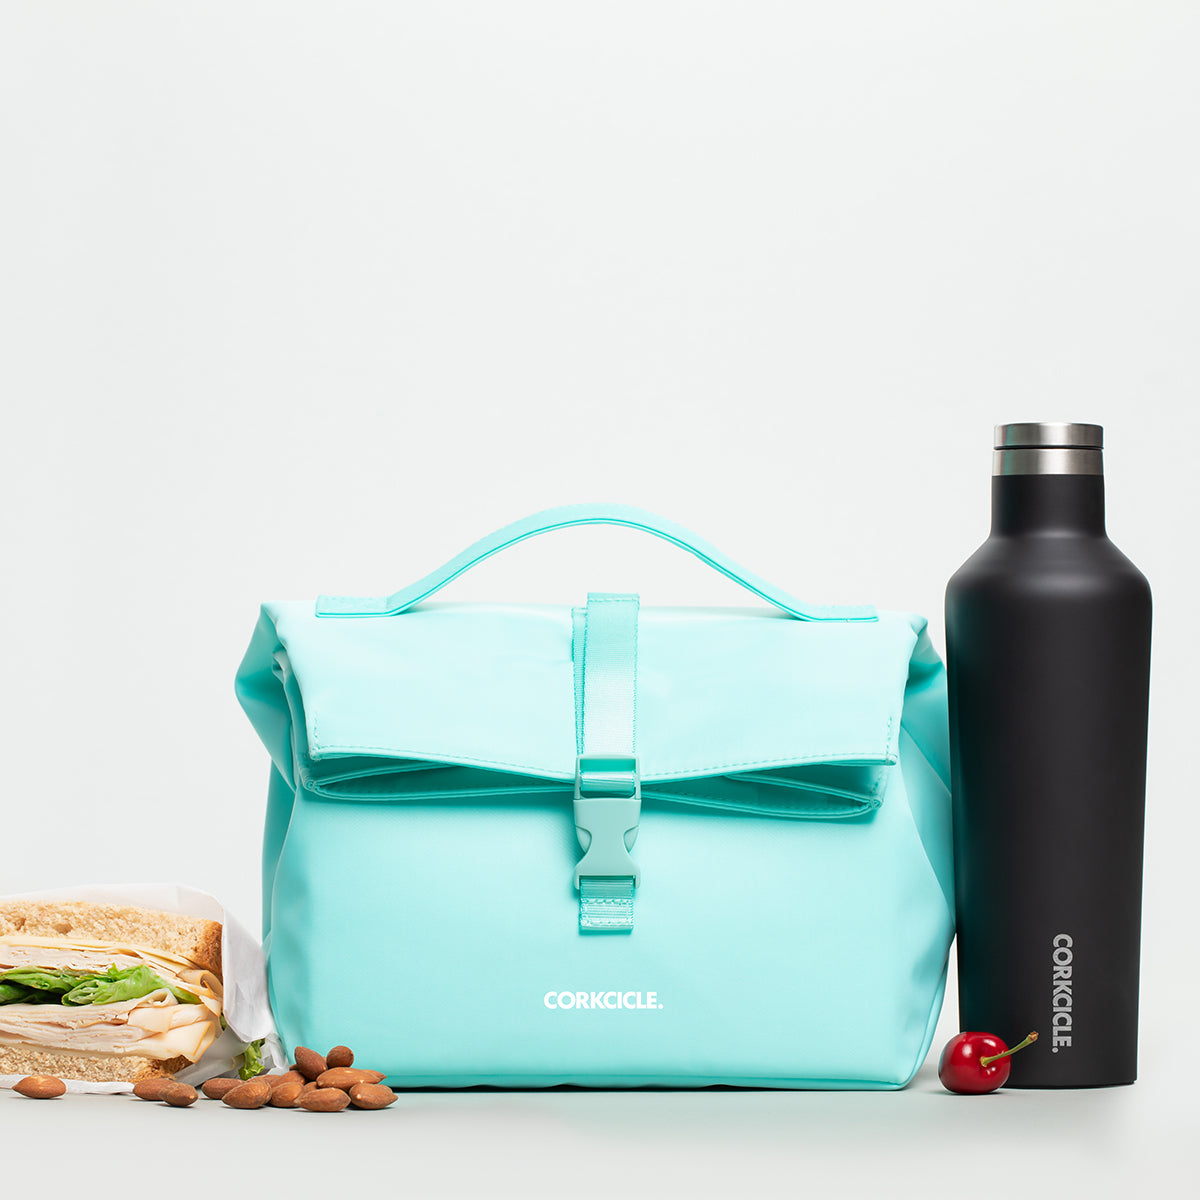 CORKCICLE Cooler Bag Nona Roll-Top - Turquoise Lunch Bag